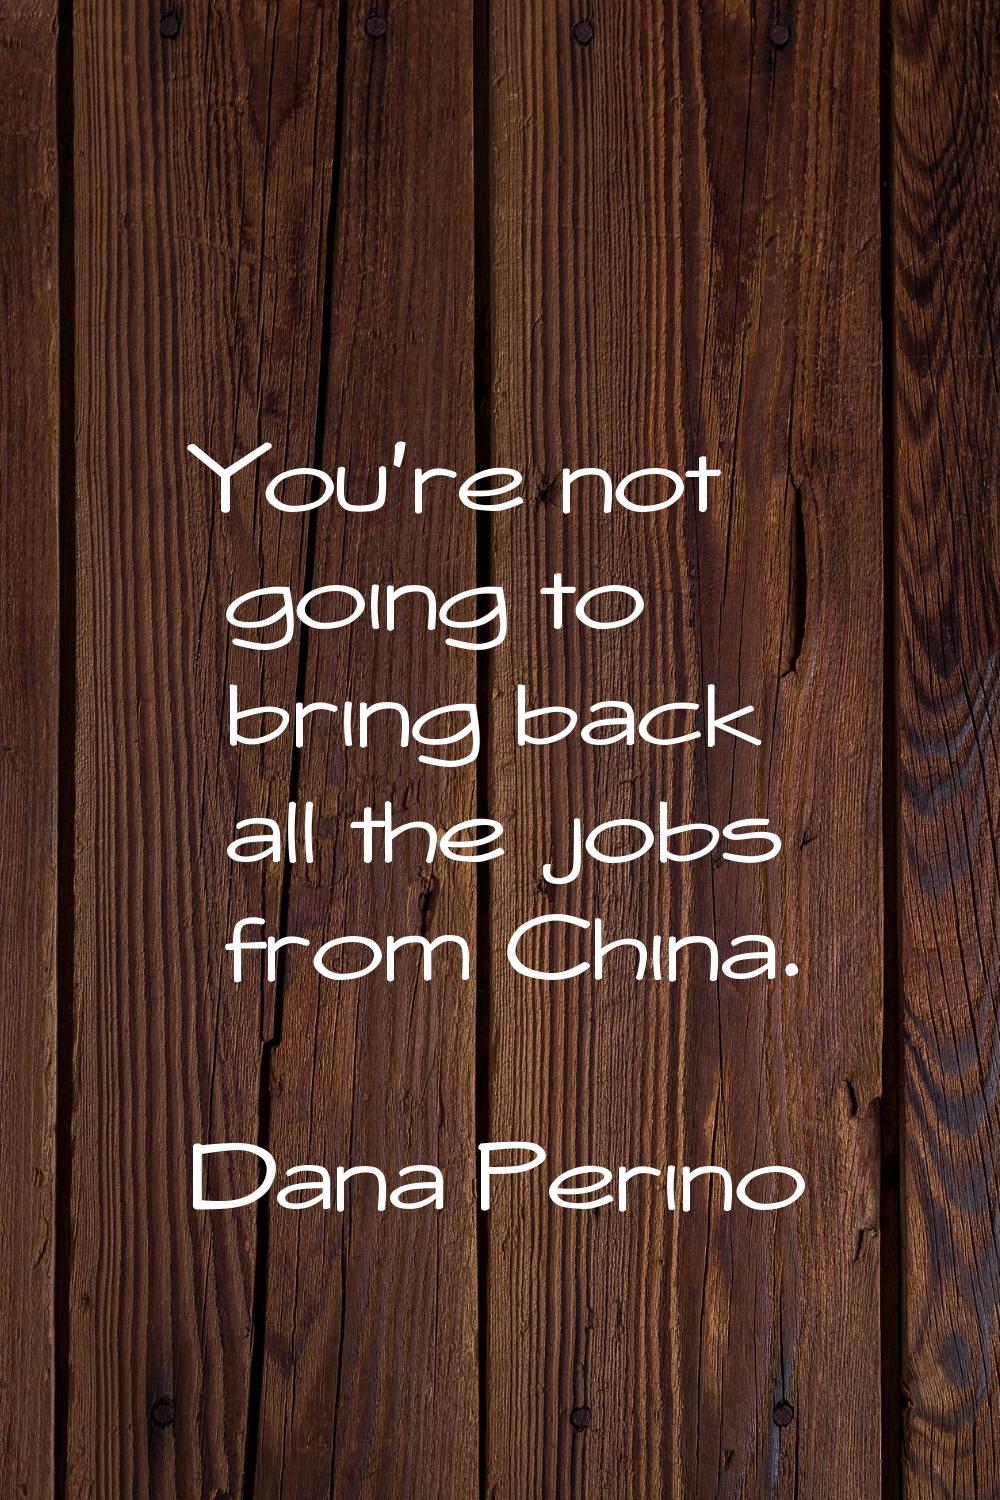 You're not going to bring back all the jobs from China.